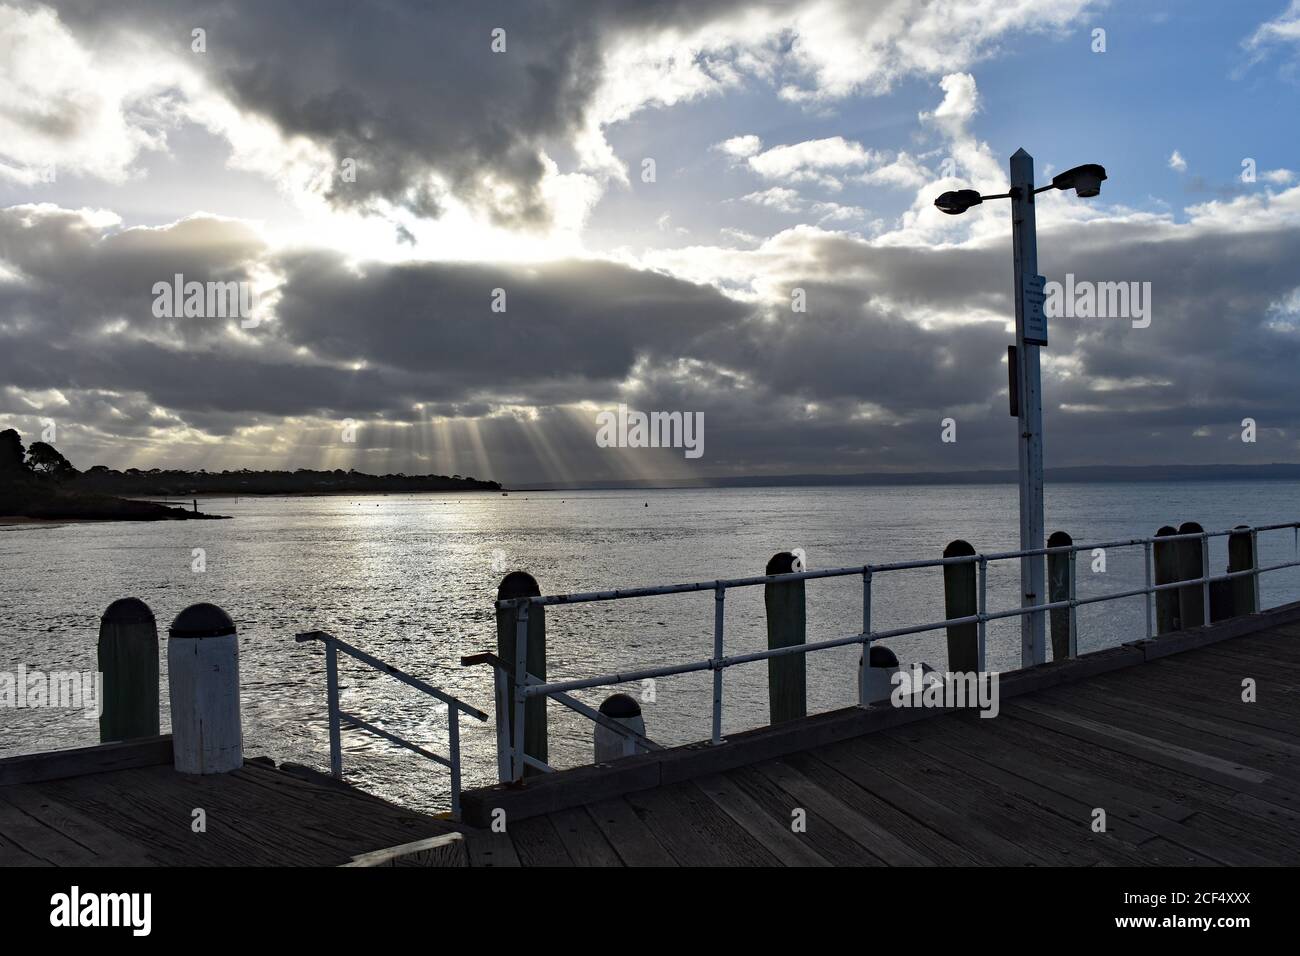 Cowes Pier on Phillip Island, Australia.  The sun's rays are shinning through the clouds in the distance and light up the sea surrounding the pier. Stock Photo